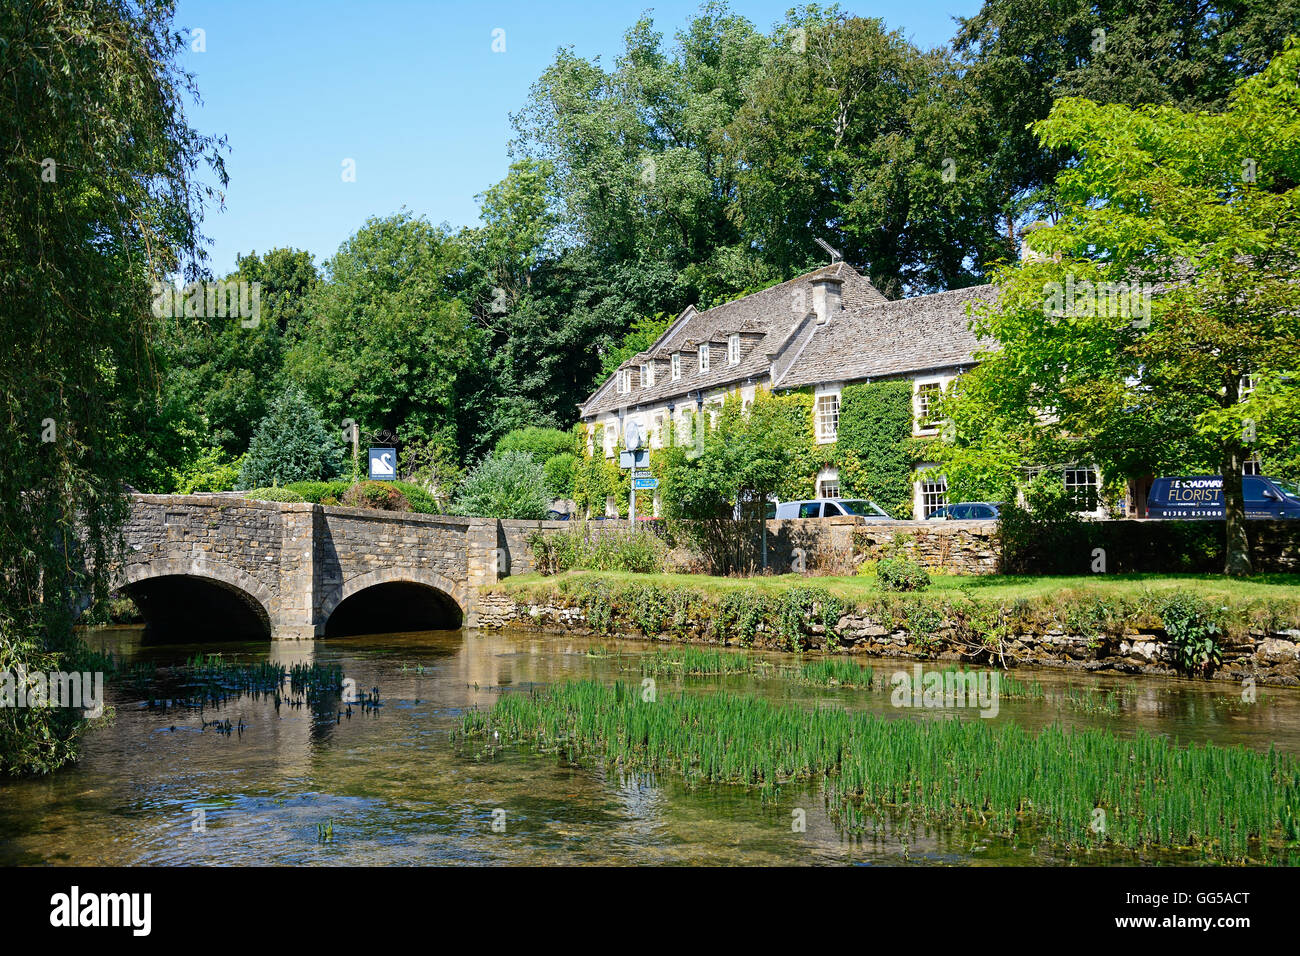 View along the River Coln towards the stone bridge with The Swan Hotel to the rear, Bibury, Cotswolds, Gloucestershire, England, Stock Photo